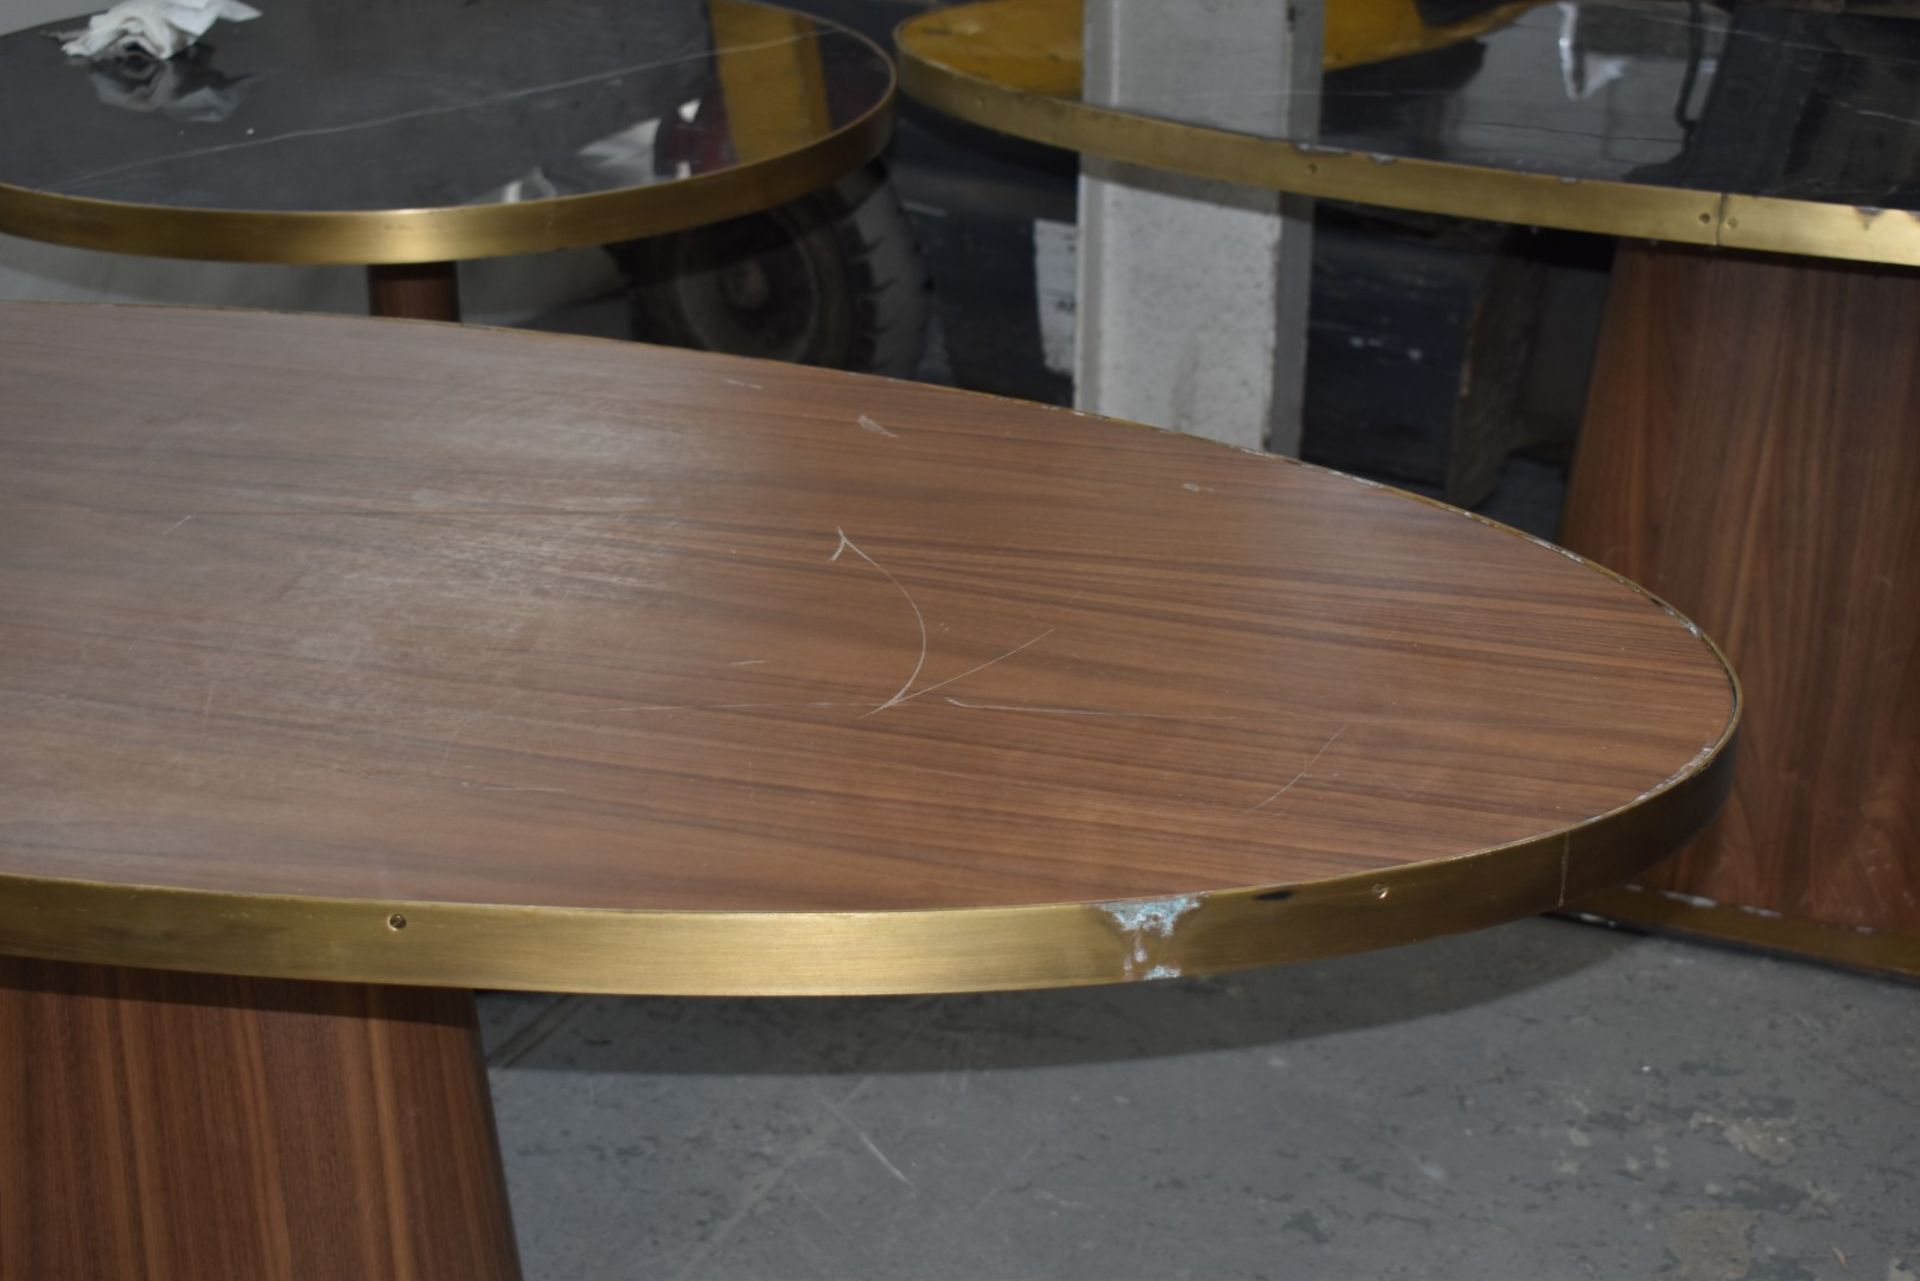 1 x Oval Banqueting Dining Table By AKP Design Athens - Walnut Top With Antique Brass Edging - Image 6 of 7